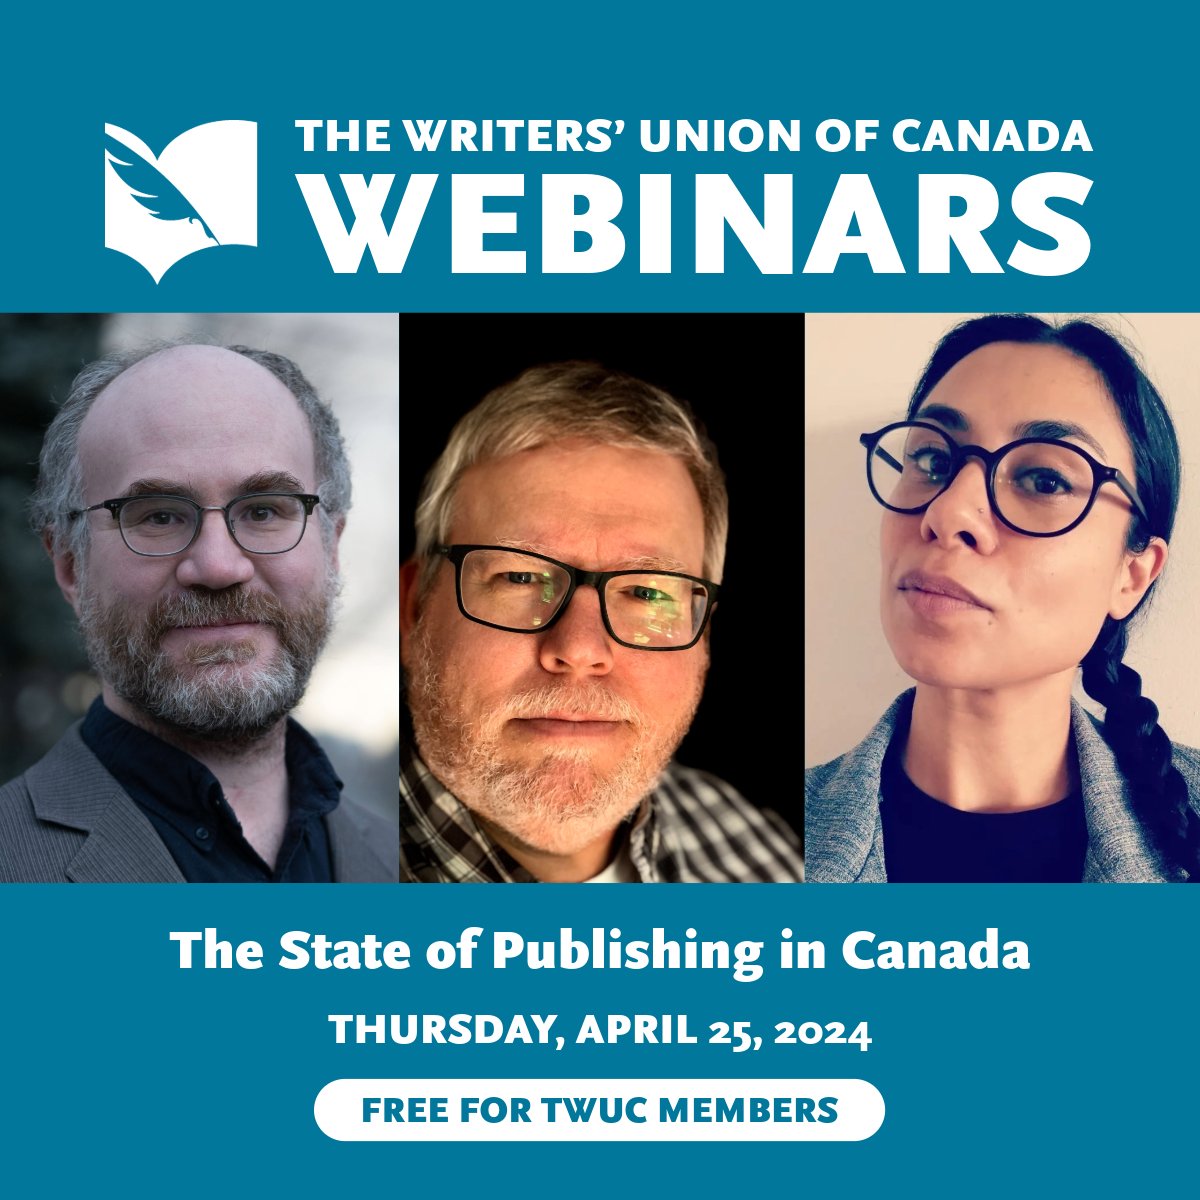 Join Jack Illingworth @CdnPublishers & John Degen @jkdegen as they discuss the state of publishing in Canada. We’ll learn about current trends, challenges, & what they think the future holds for Cdn publishing. Hosted by Preeti Kaur Dhaliwal. REGISTER: bit.ly/3sJyhe5 📚